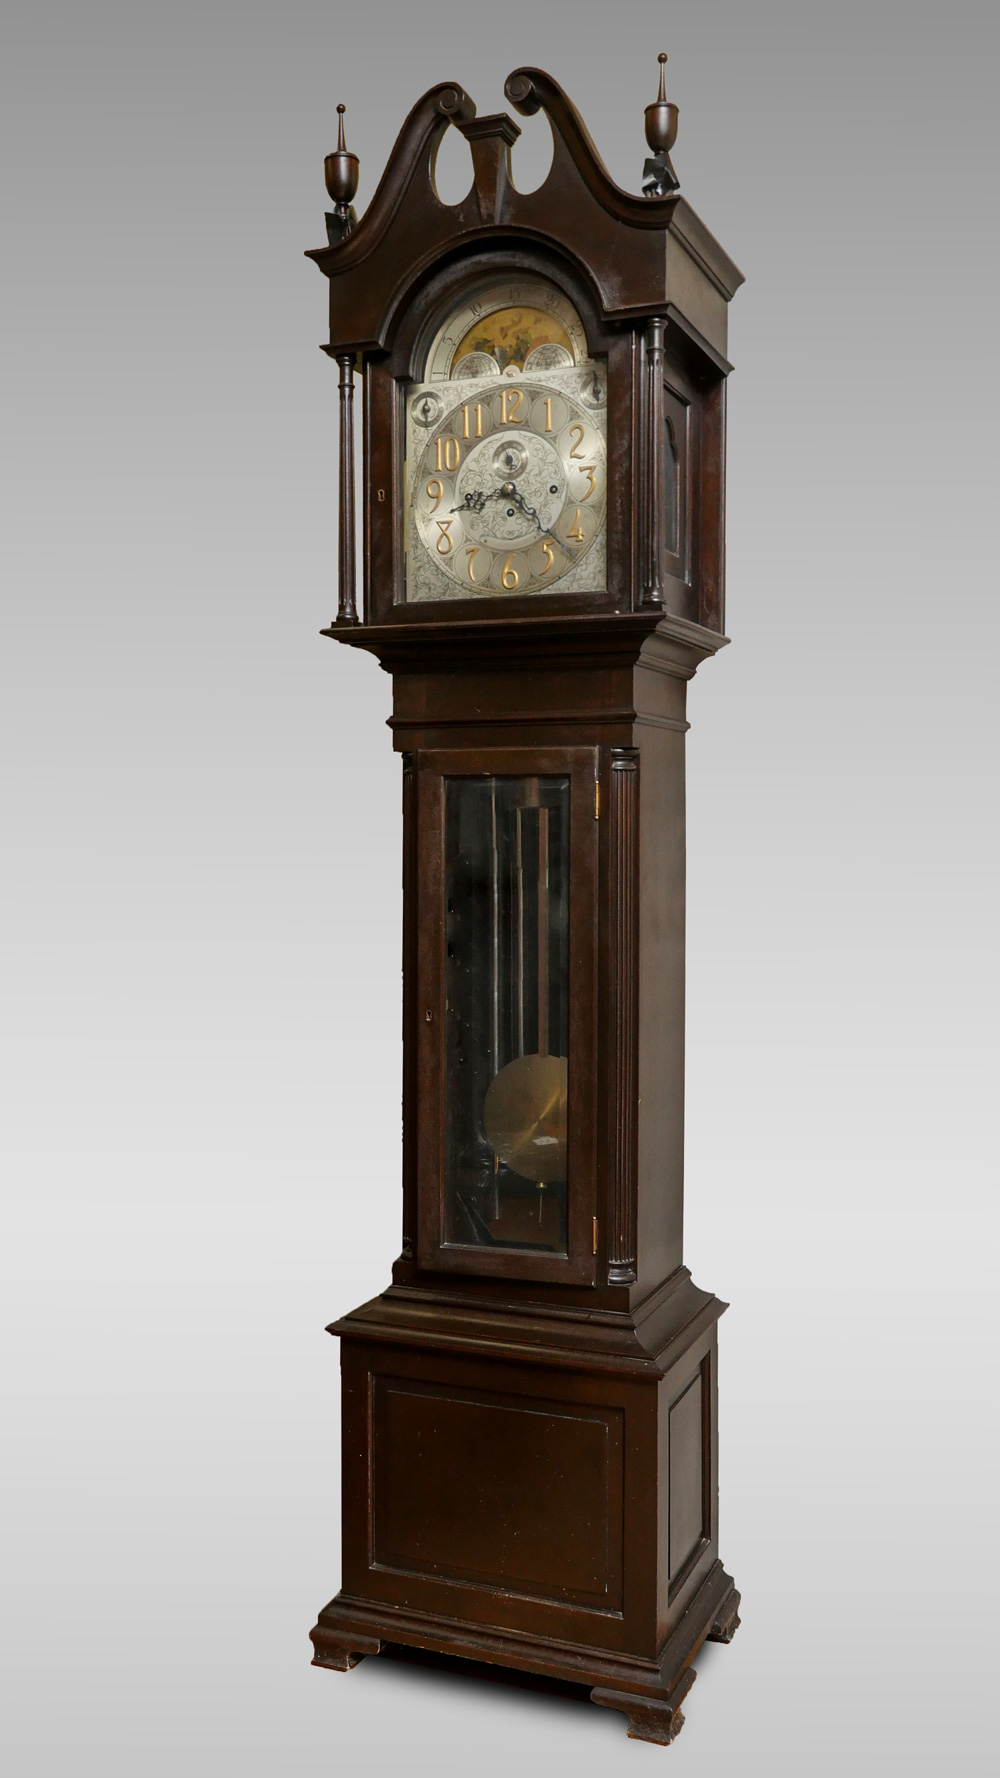 HERSCHEDES 6 TUBE GRANDFATHER CLOCK  36cc31